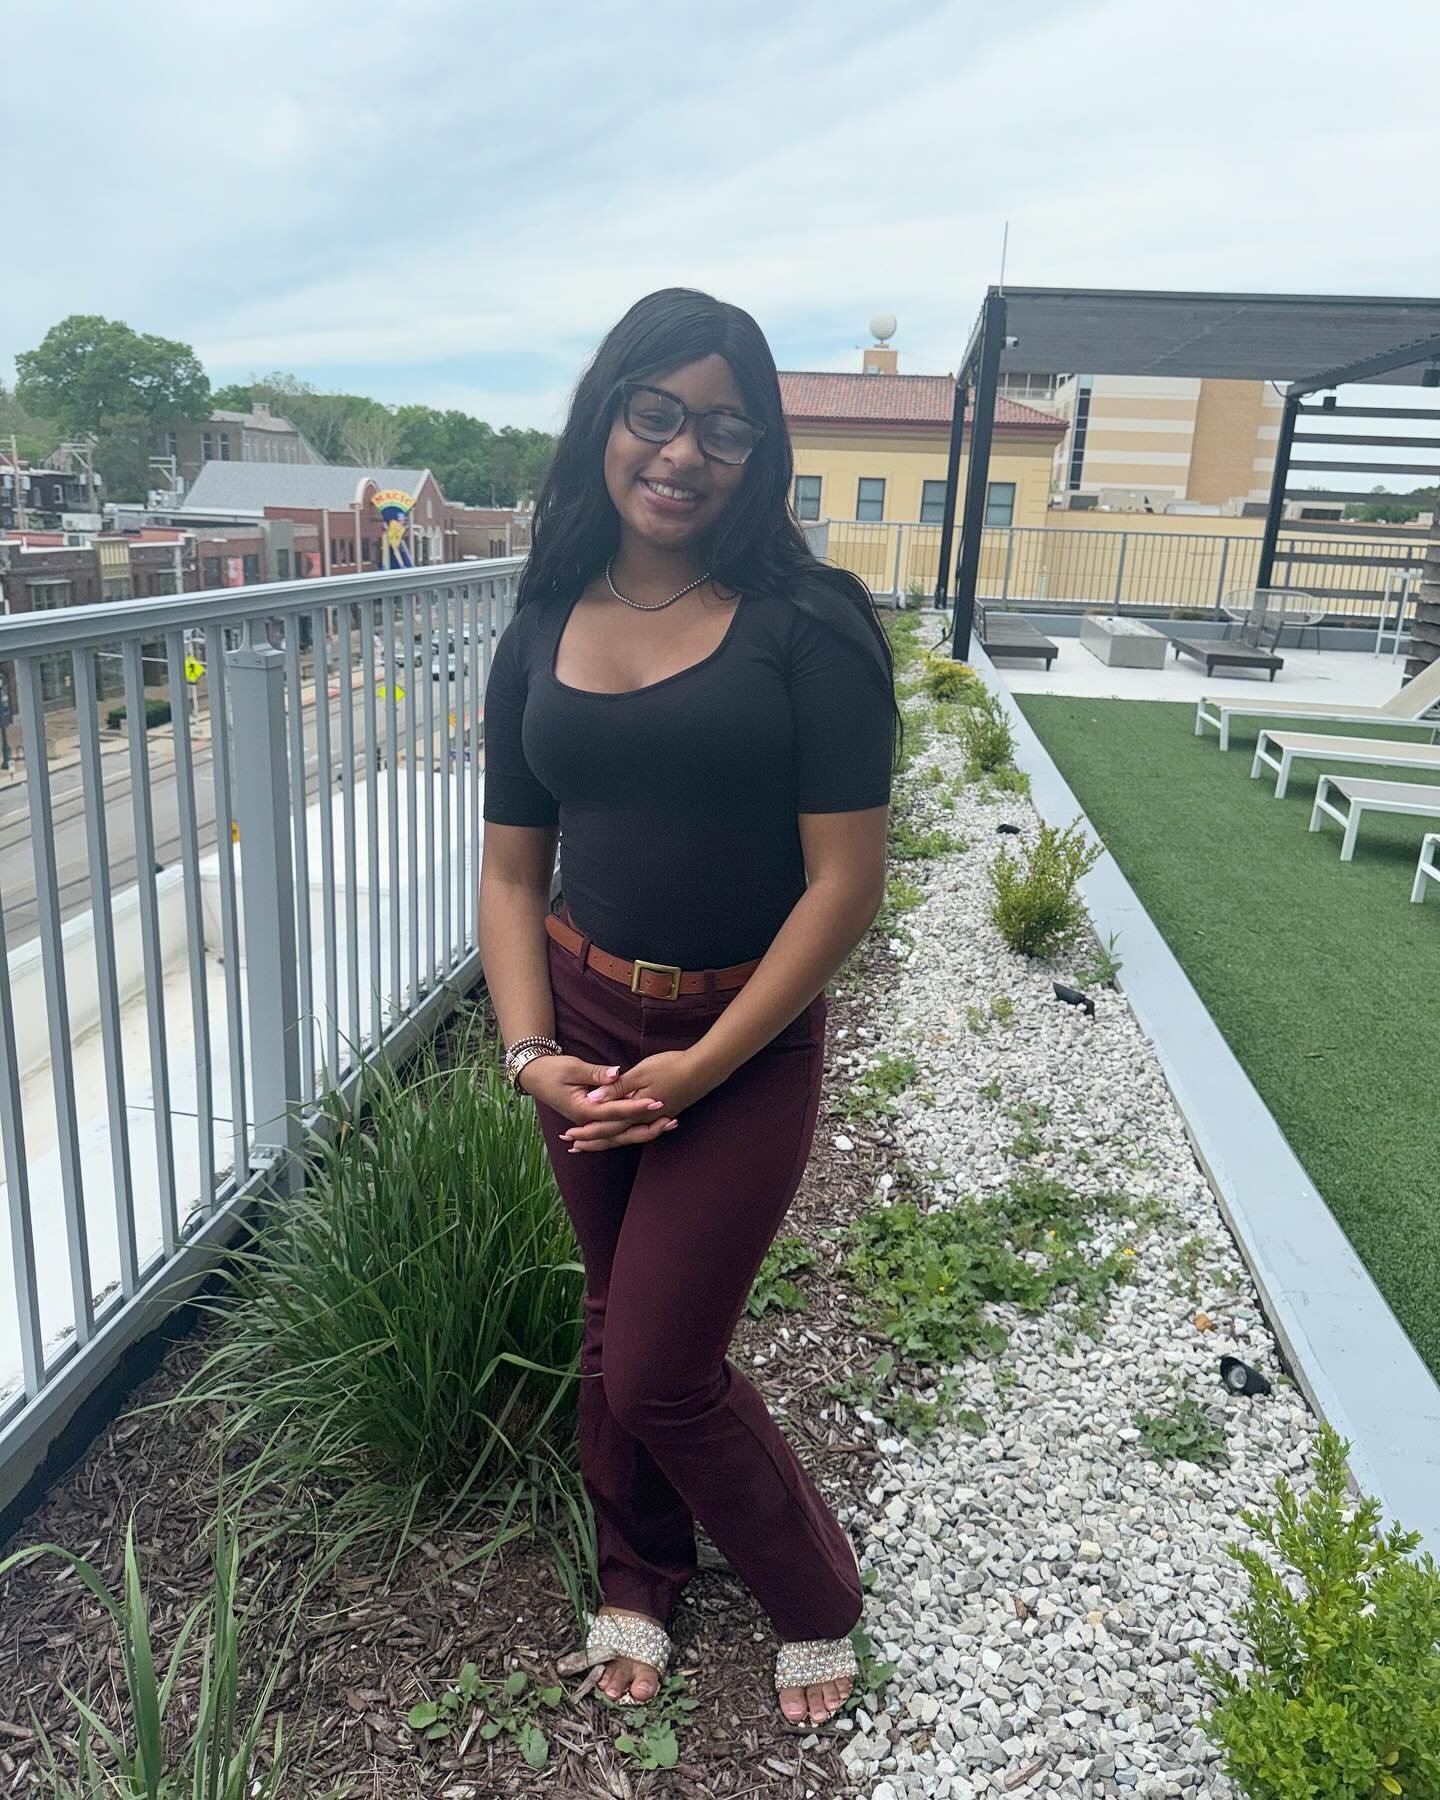 🚨 𝐌𝐞𝐞𝐭 𝐭𝐡𝐞 𝐓𝐞𝐚𝐦 🚨

Meet Kristi our Leasing Consultant ! You can catch her writing poetry in her free time!!! As well as cooking for her family! Make sure to stop by so she can welcome you to Everly on the Loop and show you around! 

#mee